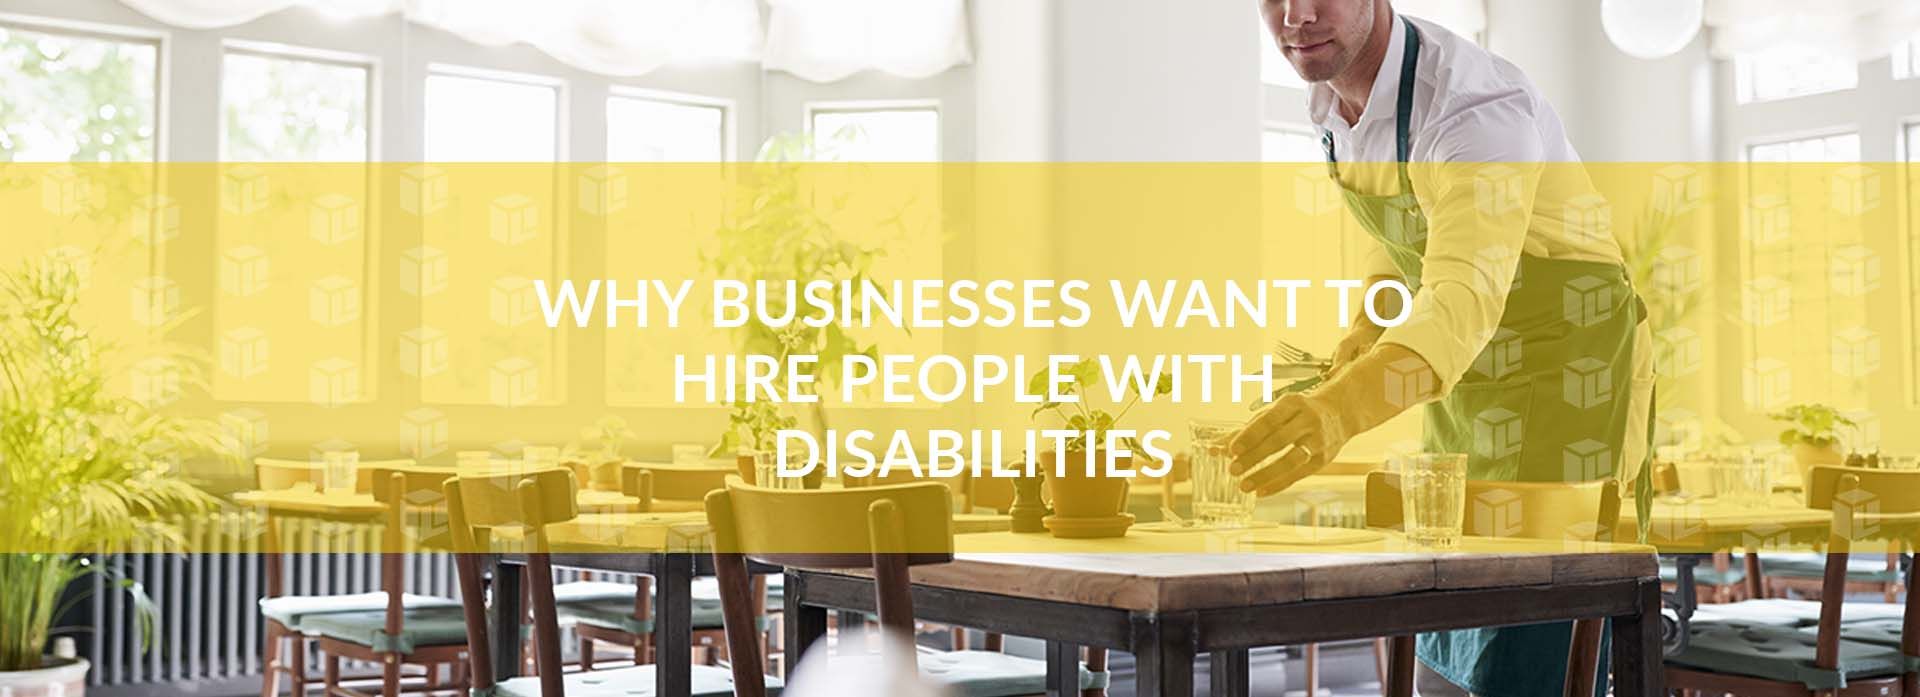 Why Businesses Want To Hire People With Disabilities Why Businesses Want To Hire People With Disabilities Why Businesses Want To Hire People With Disabilities Why Businesses Want To Hire People With Disabilities